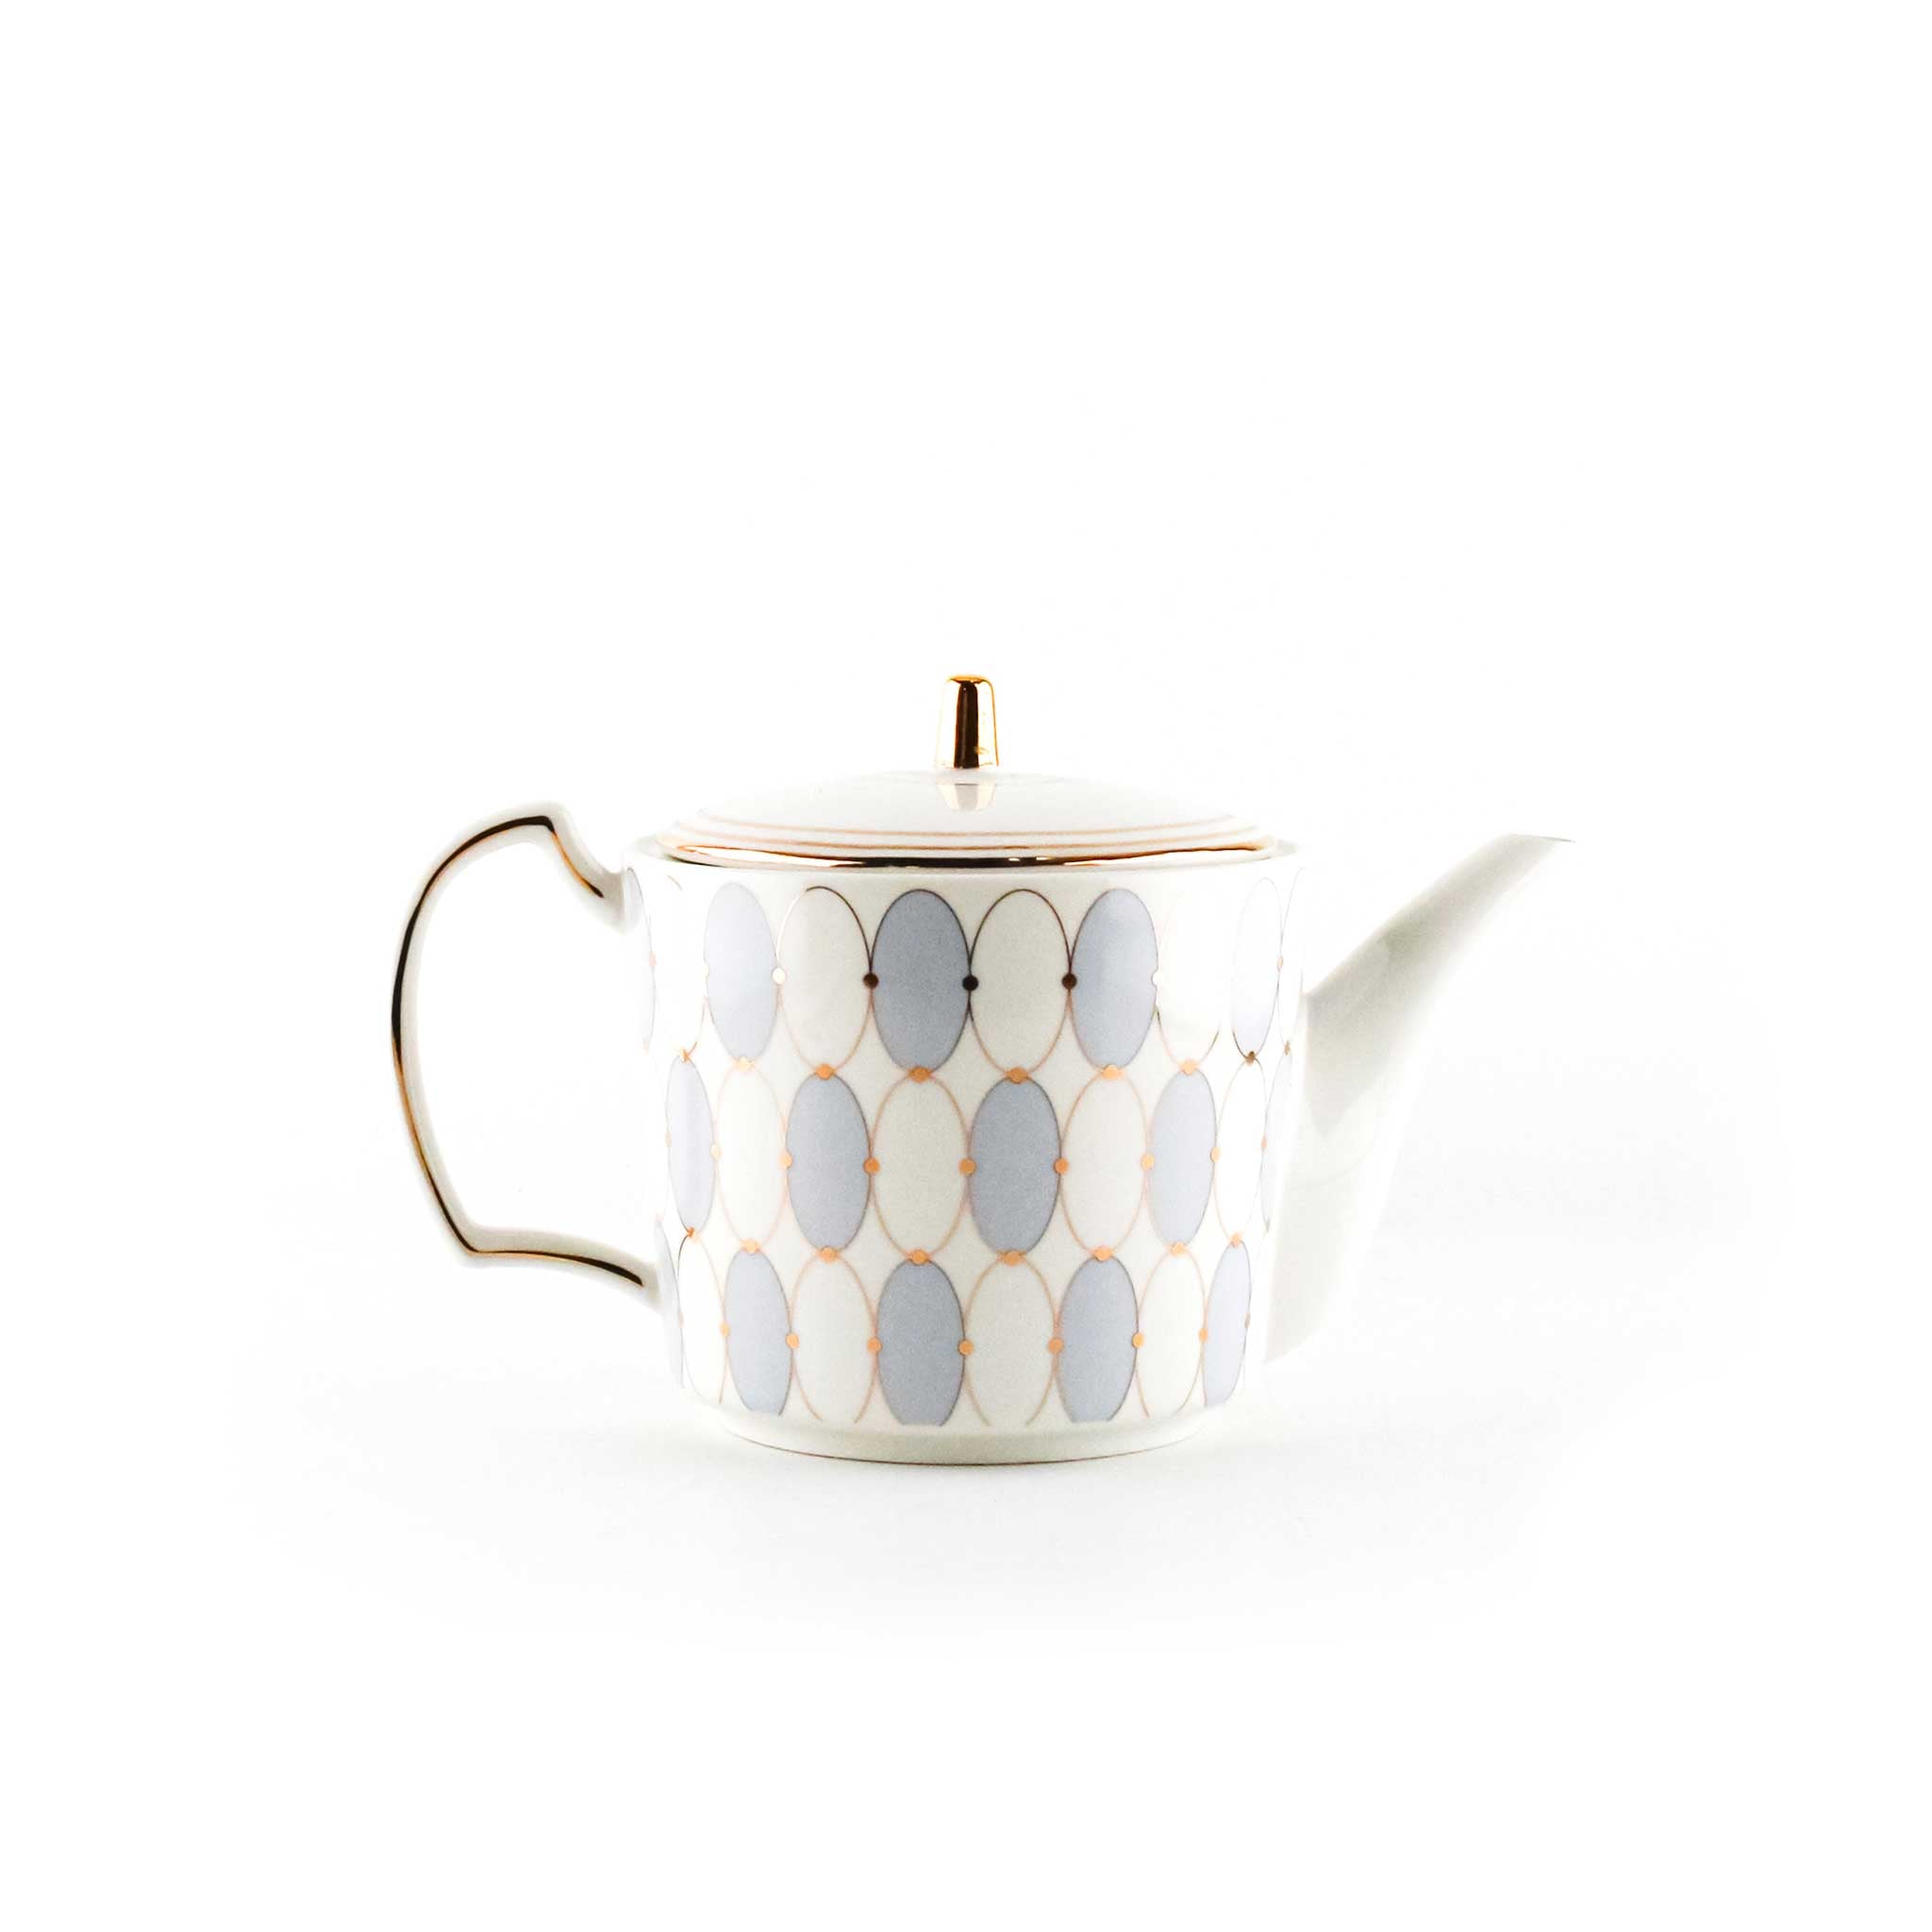 Small ceramic teapot by China Blue